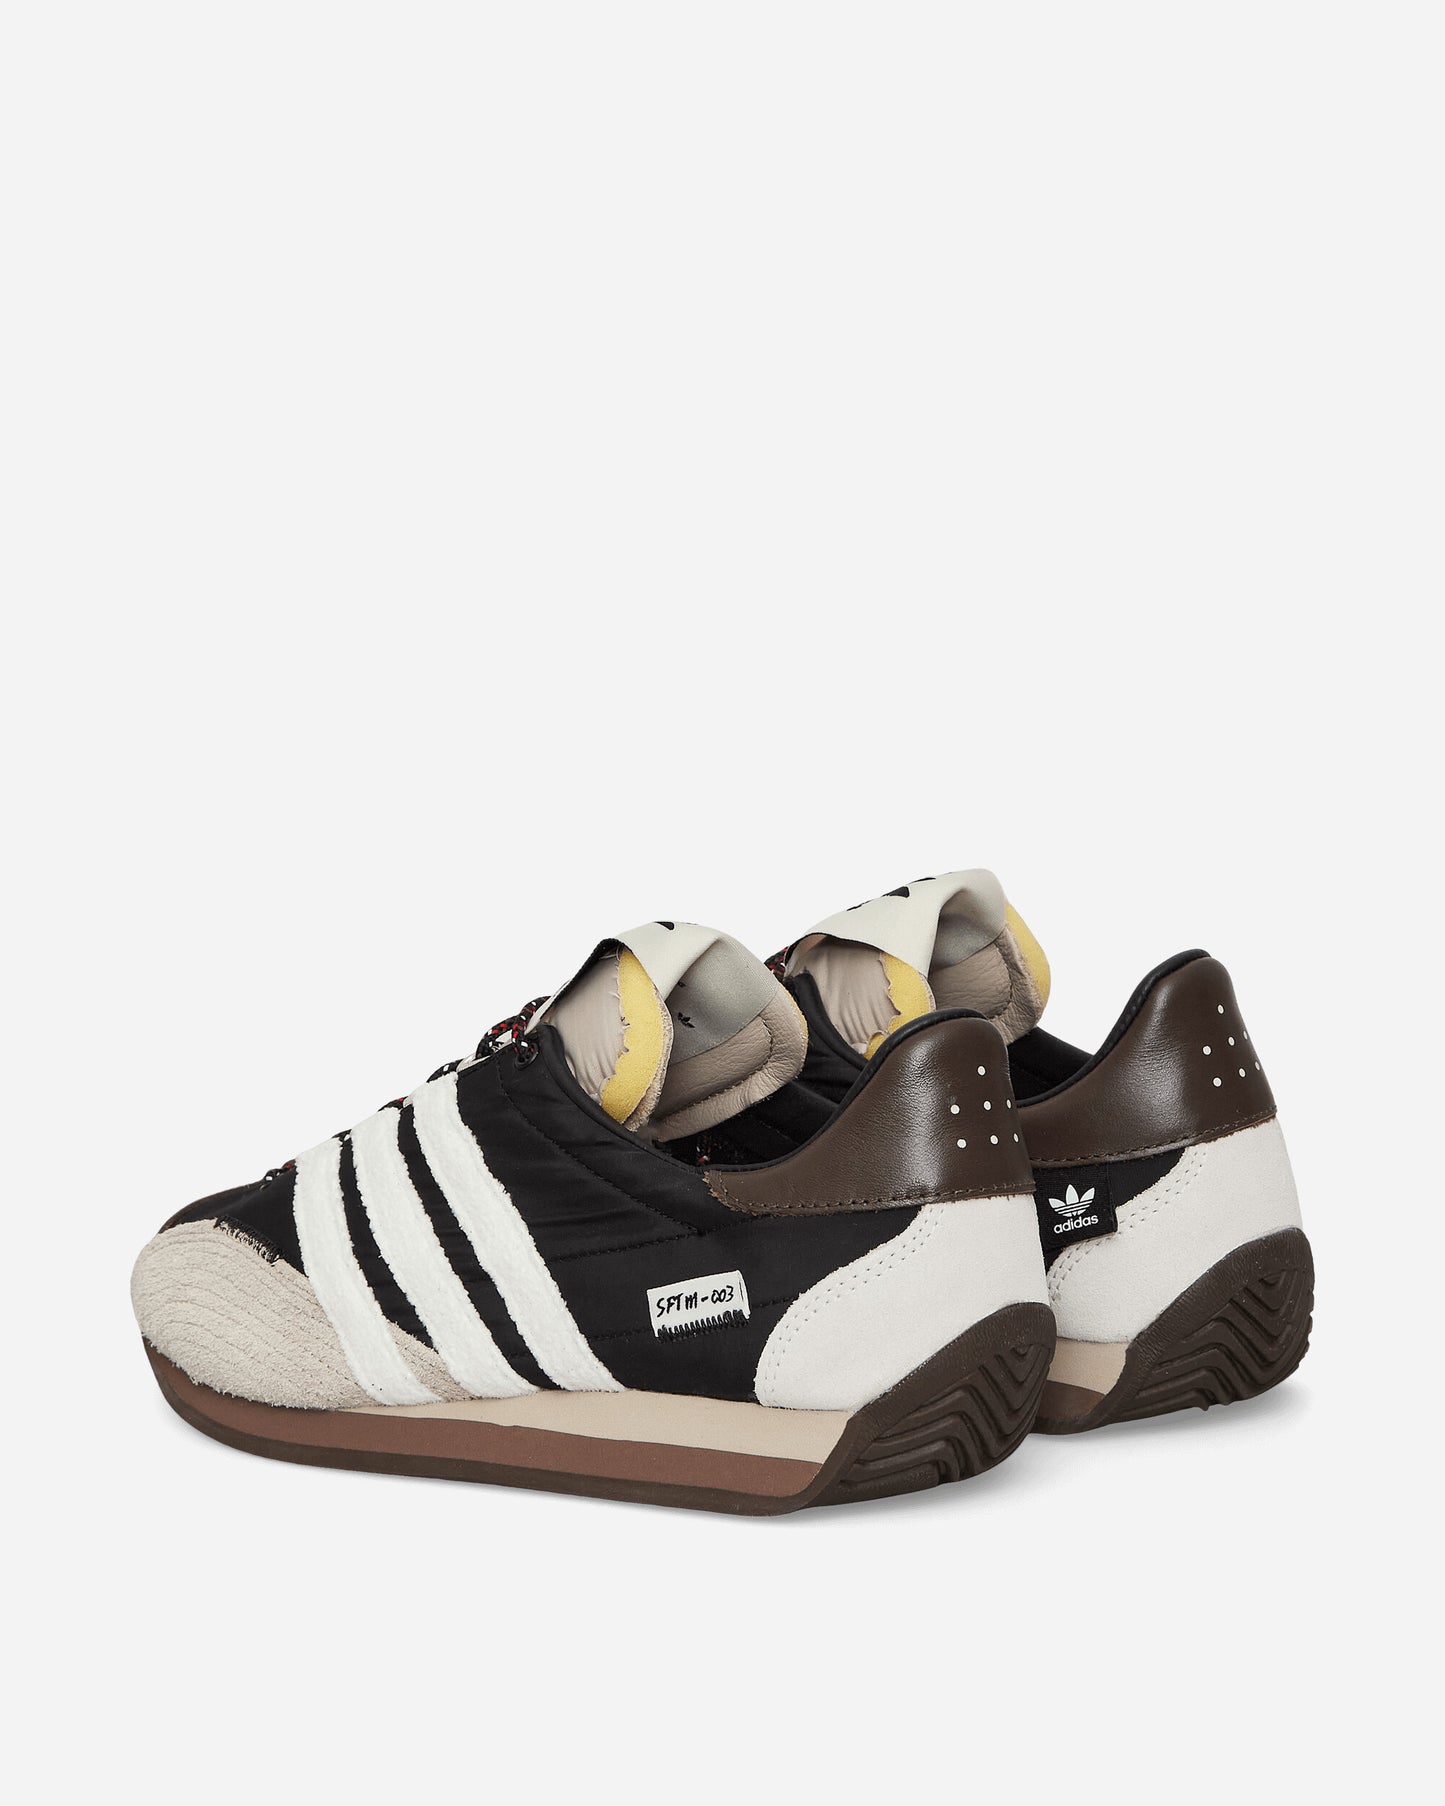 adidas Country Og Sftm Core Black/Core White Sneakers Low ID3546 001